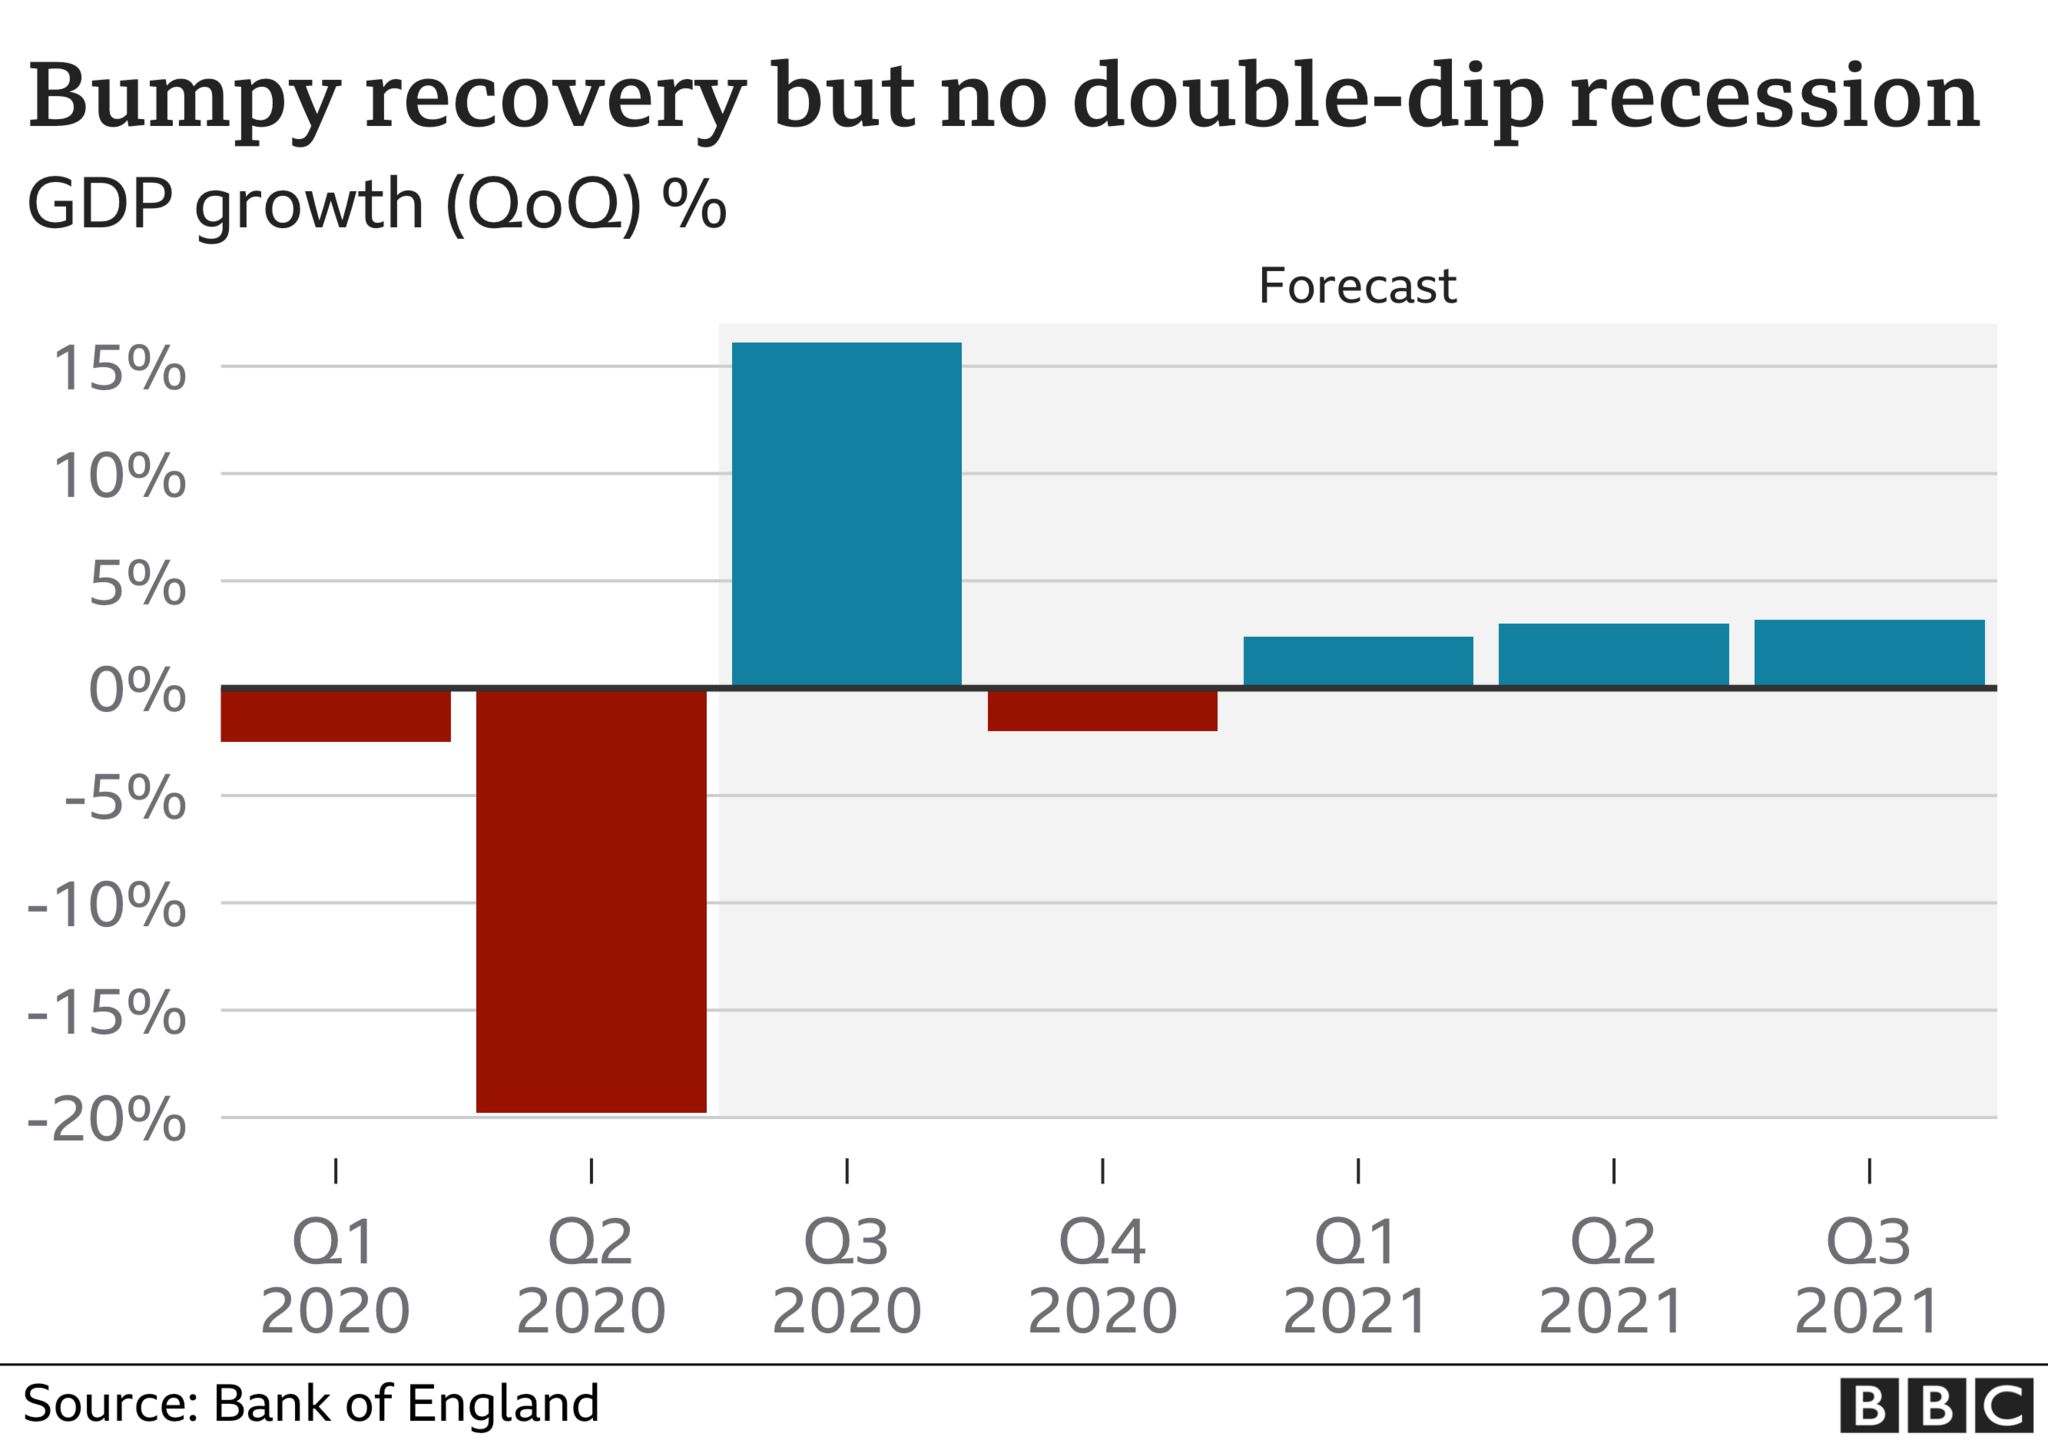 No double dip recession for the UK.